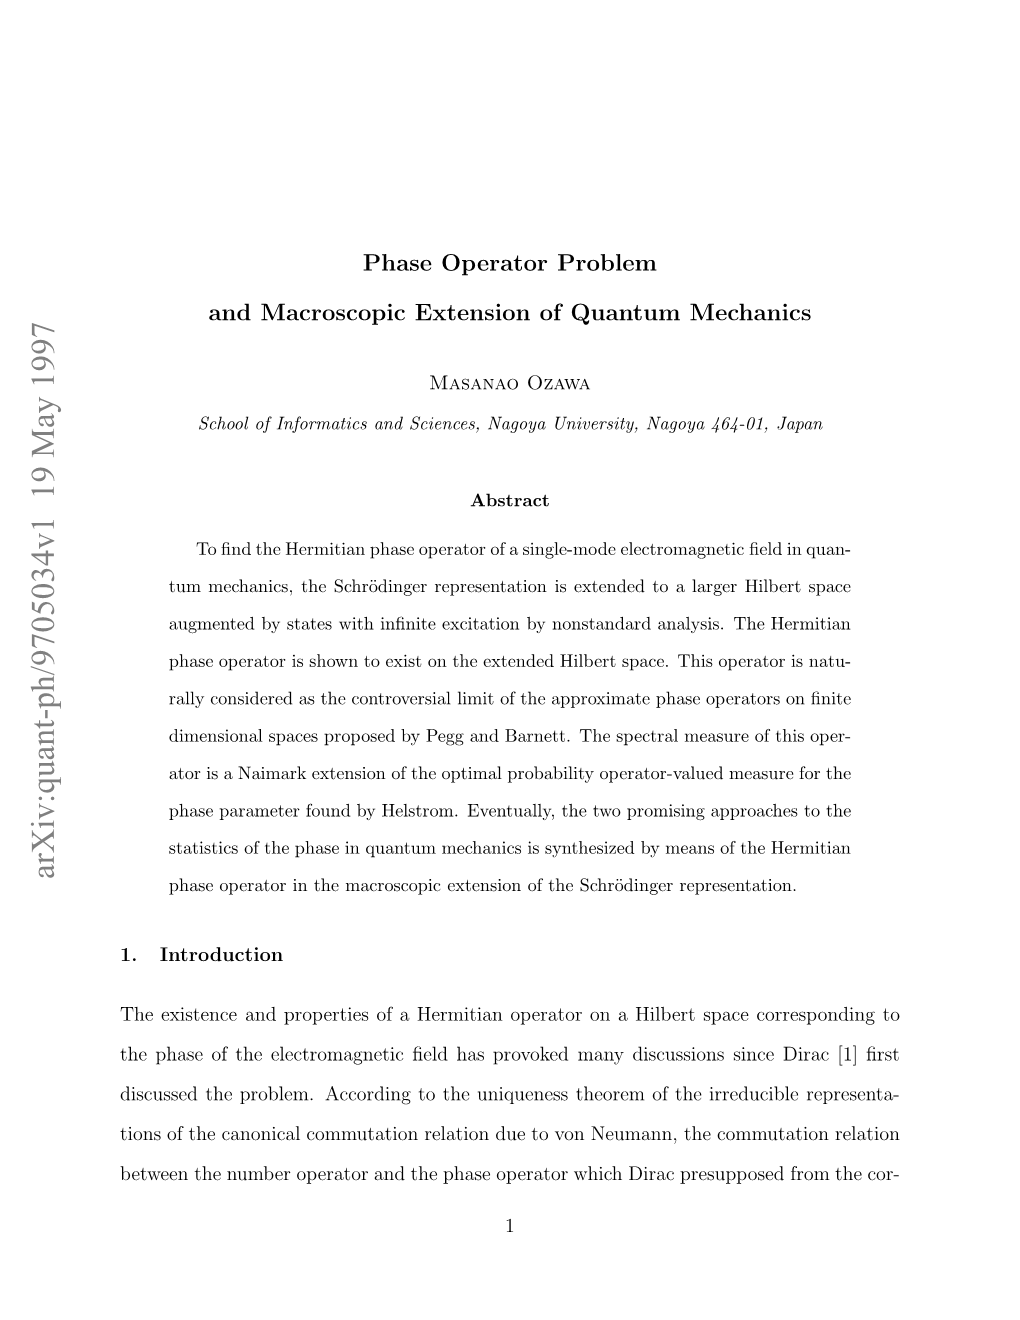 Phase Operator Problem and Macroscopic Extension of Quantum